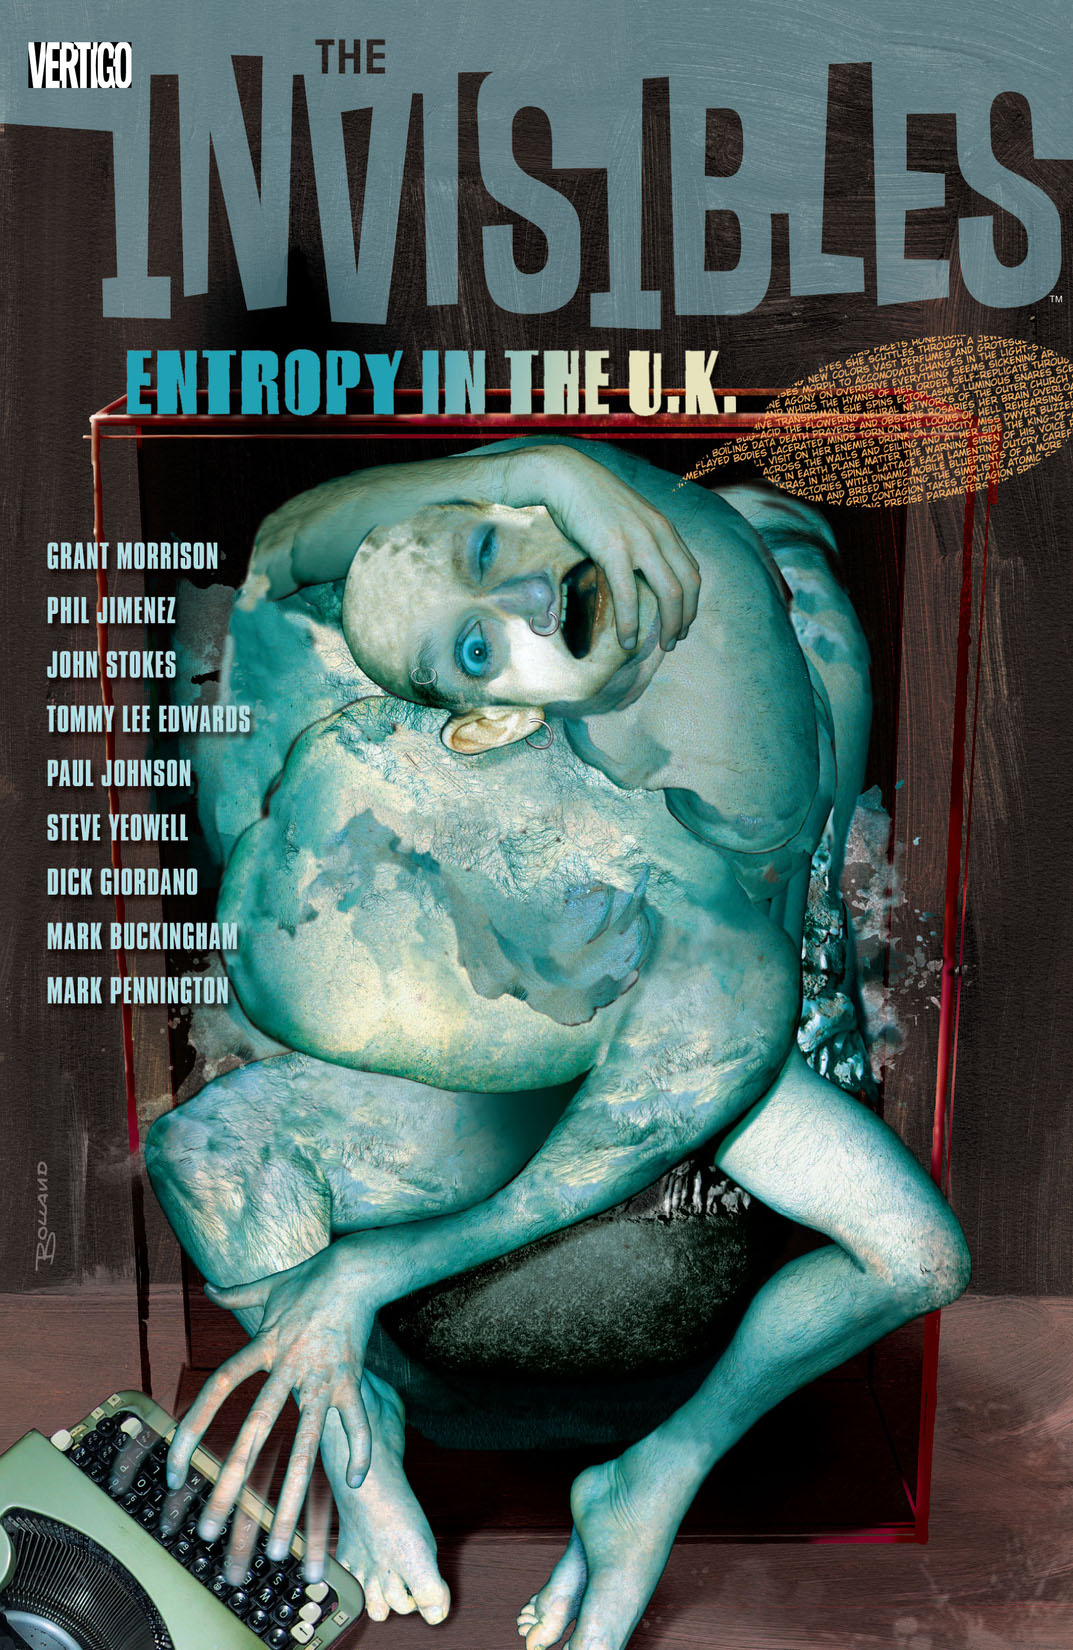 The Invisibles Vol. 3: Entropy in the U.K. preview images